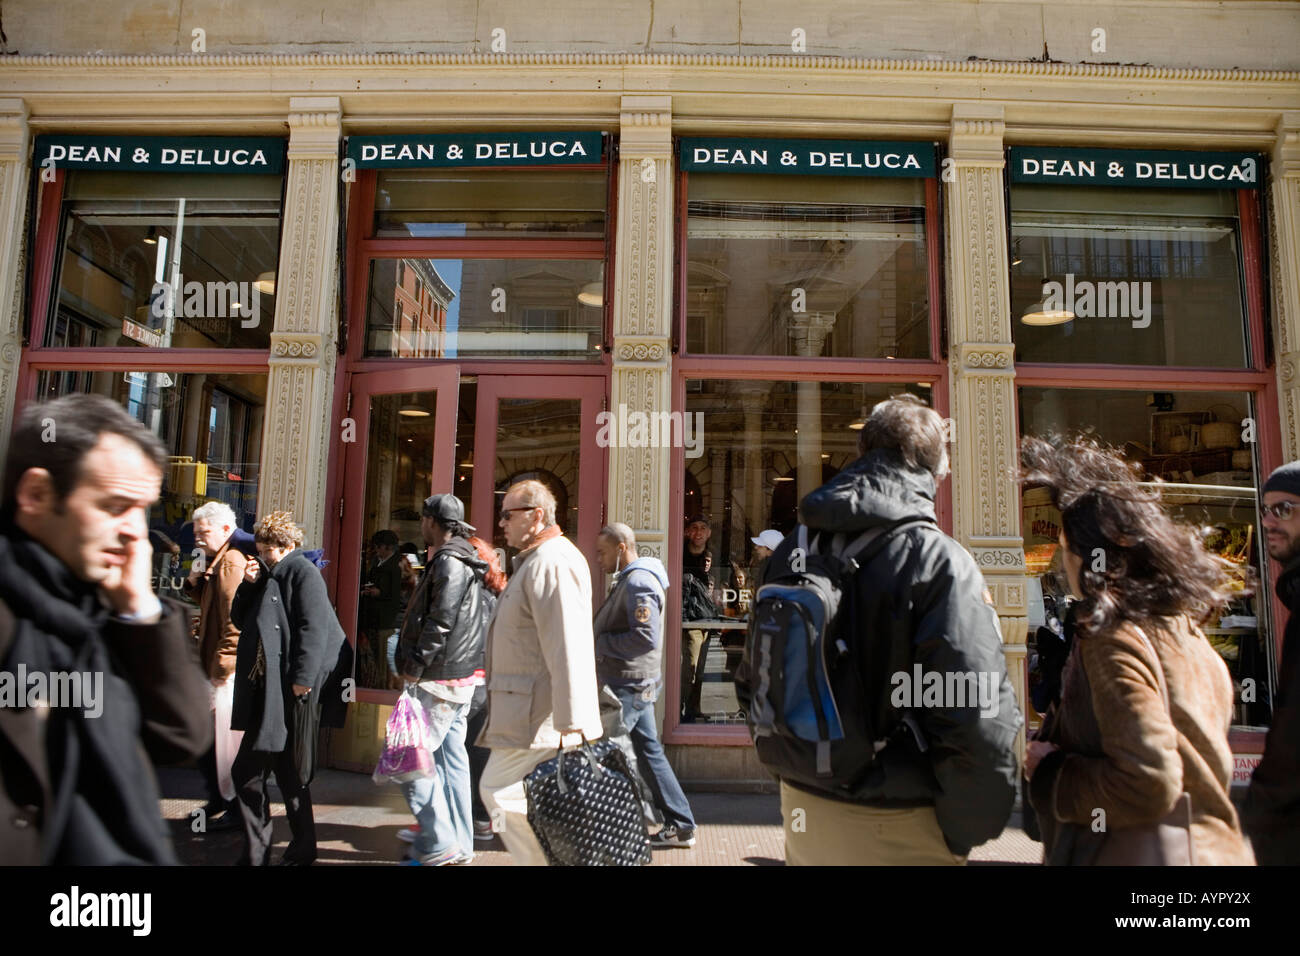 Dean and Deluca Broadway Noho District New York City Stock Photo